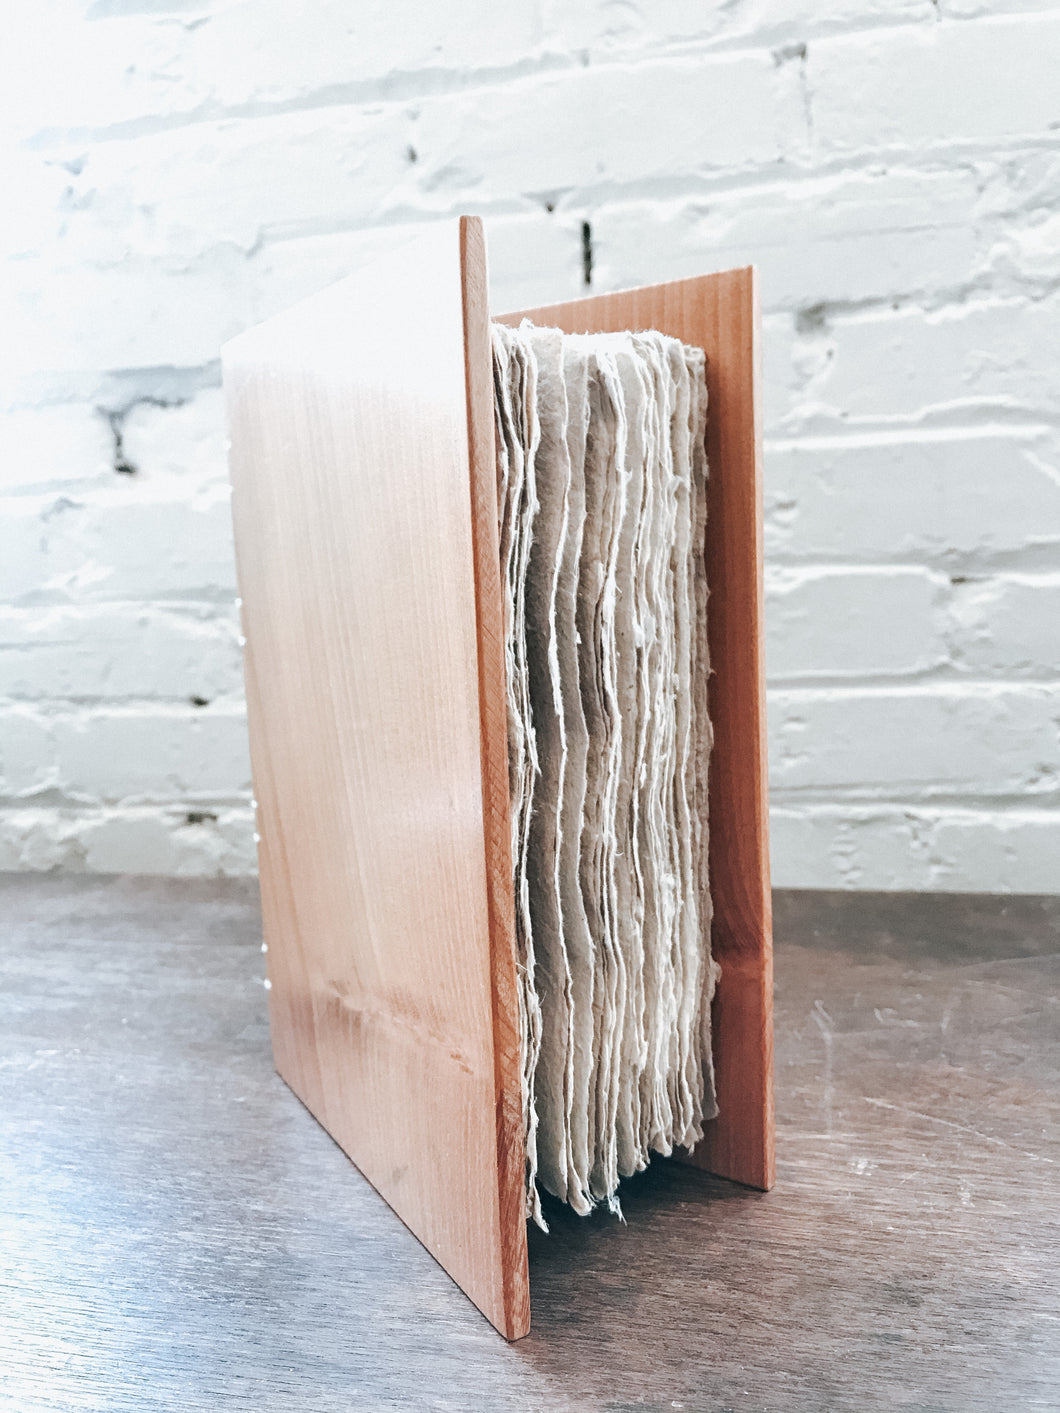 Honey Locust Matched Book Cover with Thistle/Abaca Paper